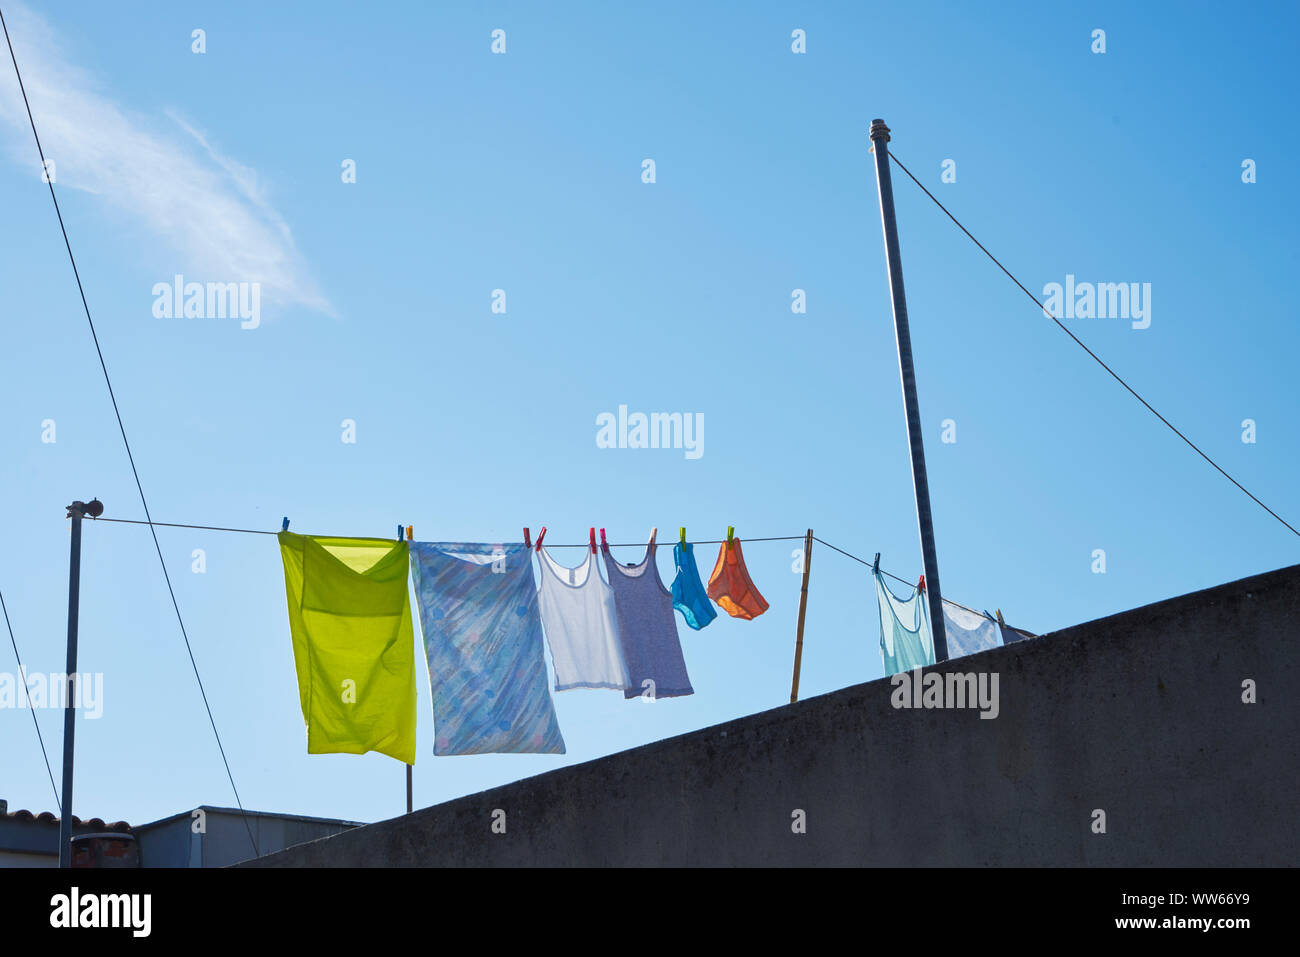 Roof of a house with clothesline and laundry hanging up to dry Stock Photo